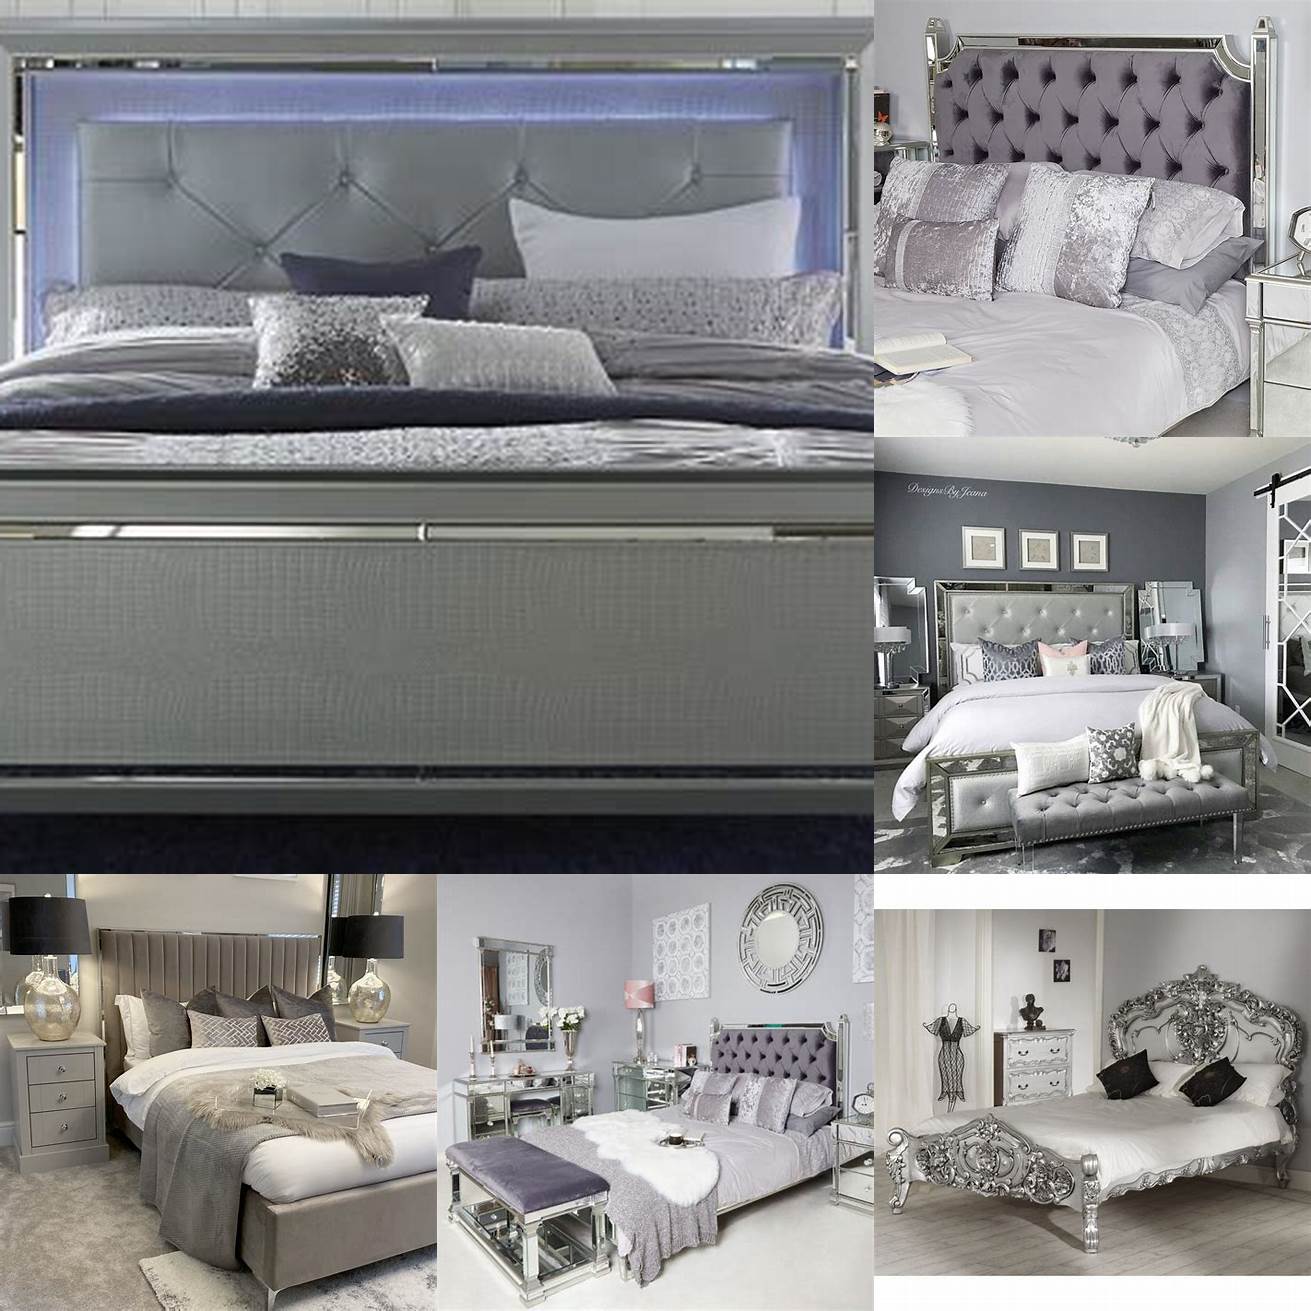 A silver bed frame adds a touch of elegance to any bedroom